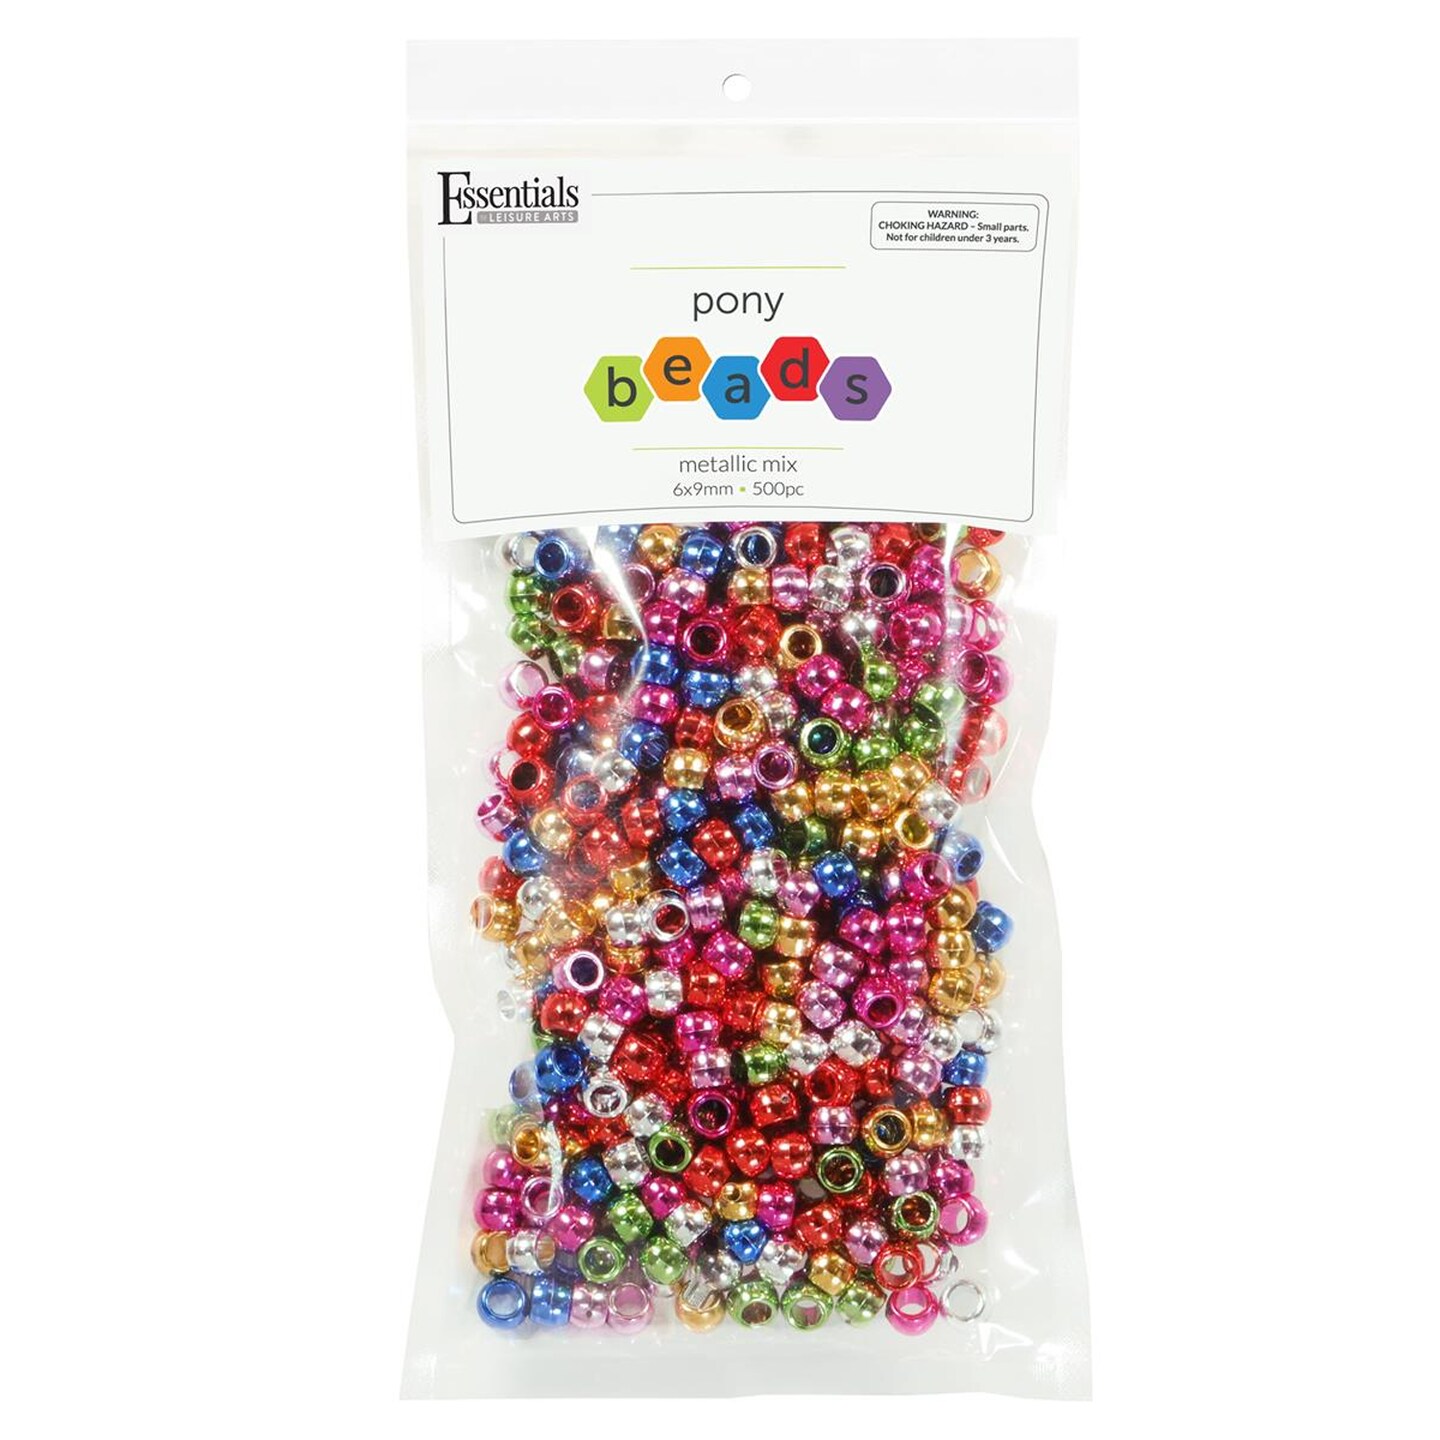 Essentials by Leisure Arts Pony Bead 6mm x 9mm Metallic Mix Opaque Plastic Pony Beads Bulk 500 pieces for Arts, Crafts, Bracelet, Necklace, Jewelry Making, Earring, Hair Braiding